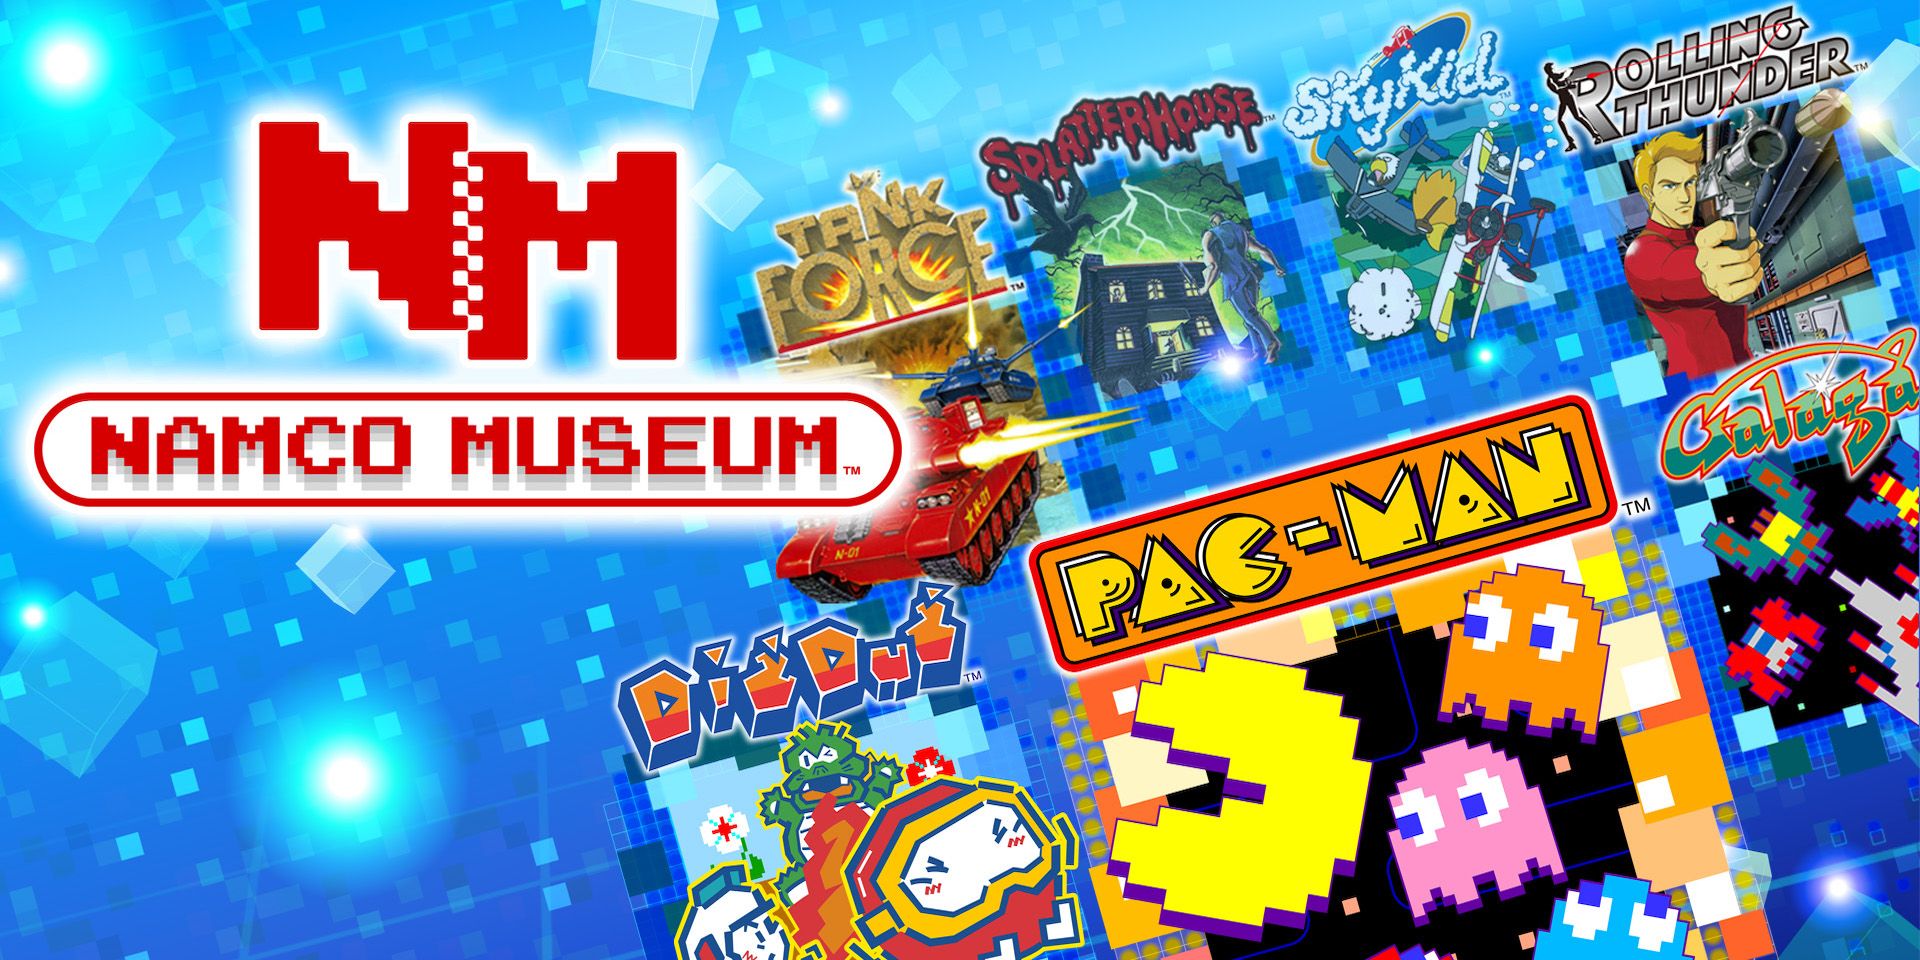 The title artwork seen on Namco Museum